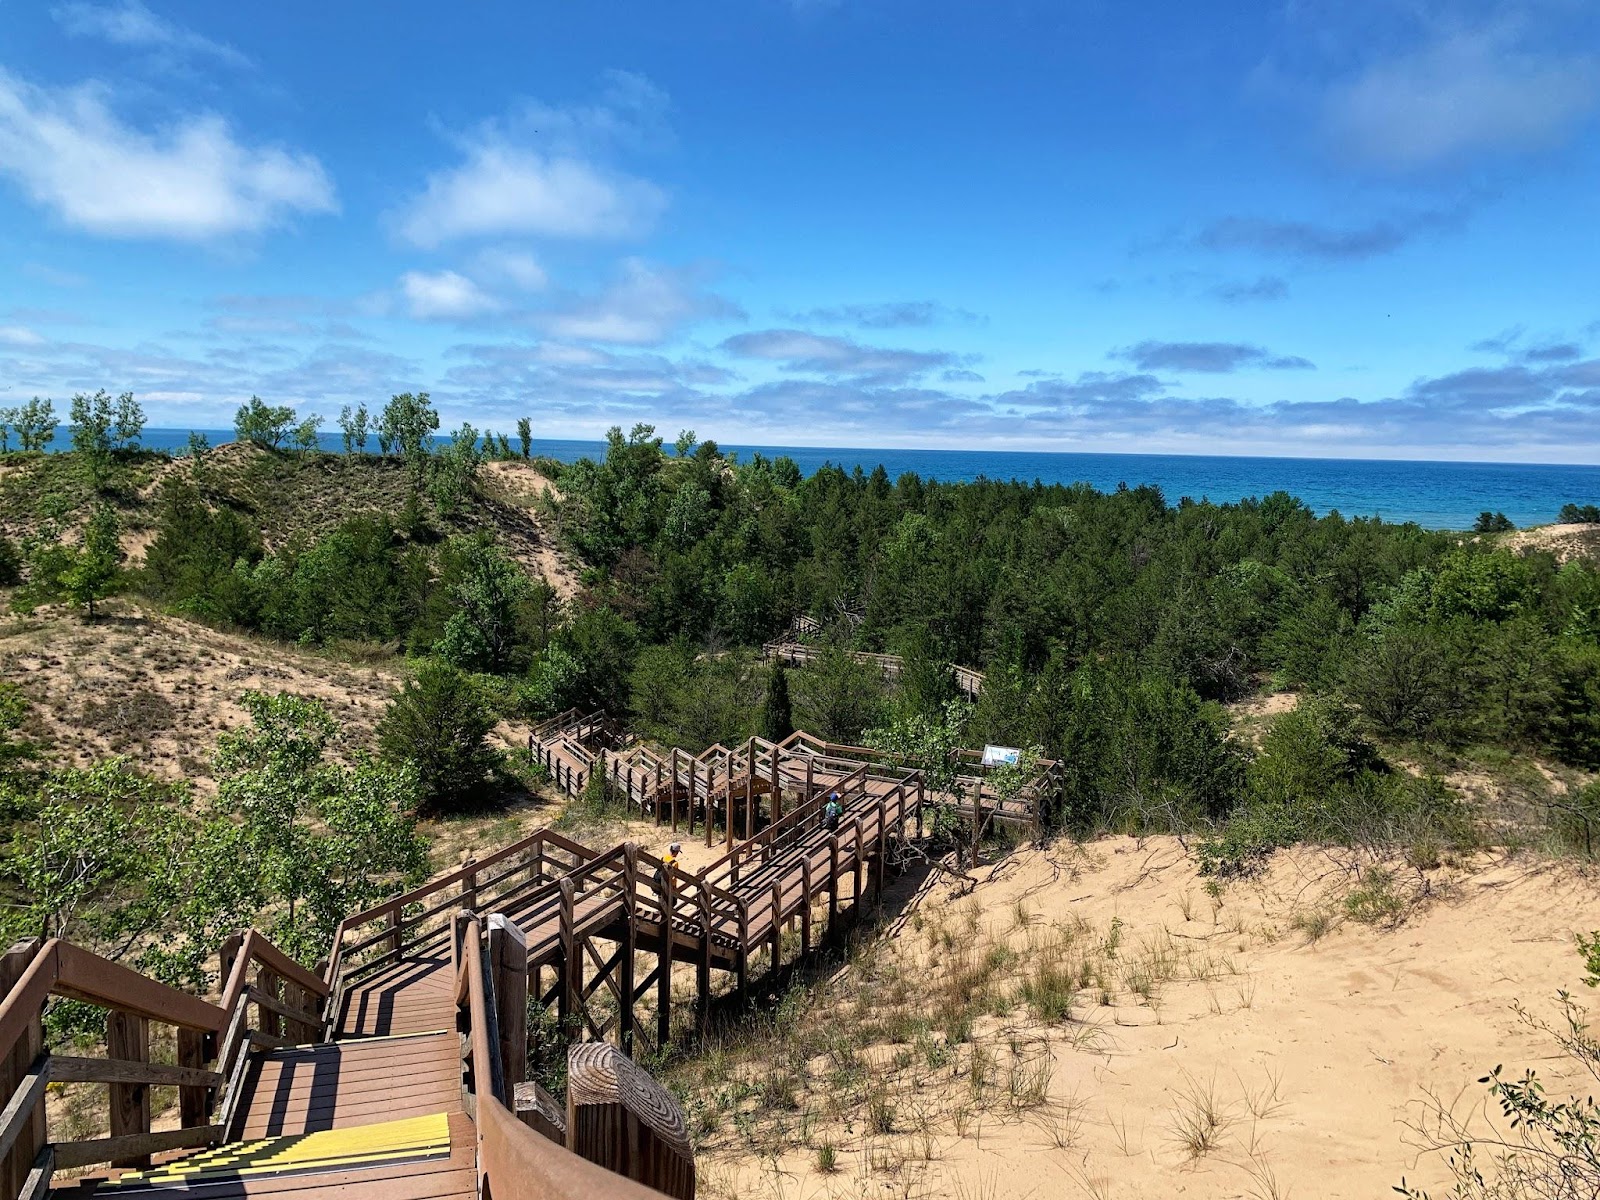 Hiking trail at Indiana Dunes National Park